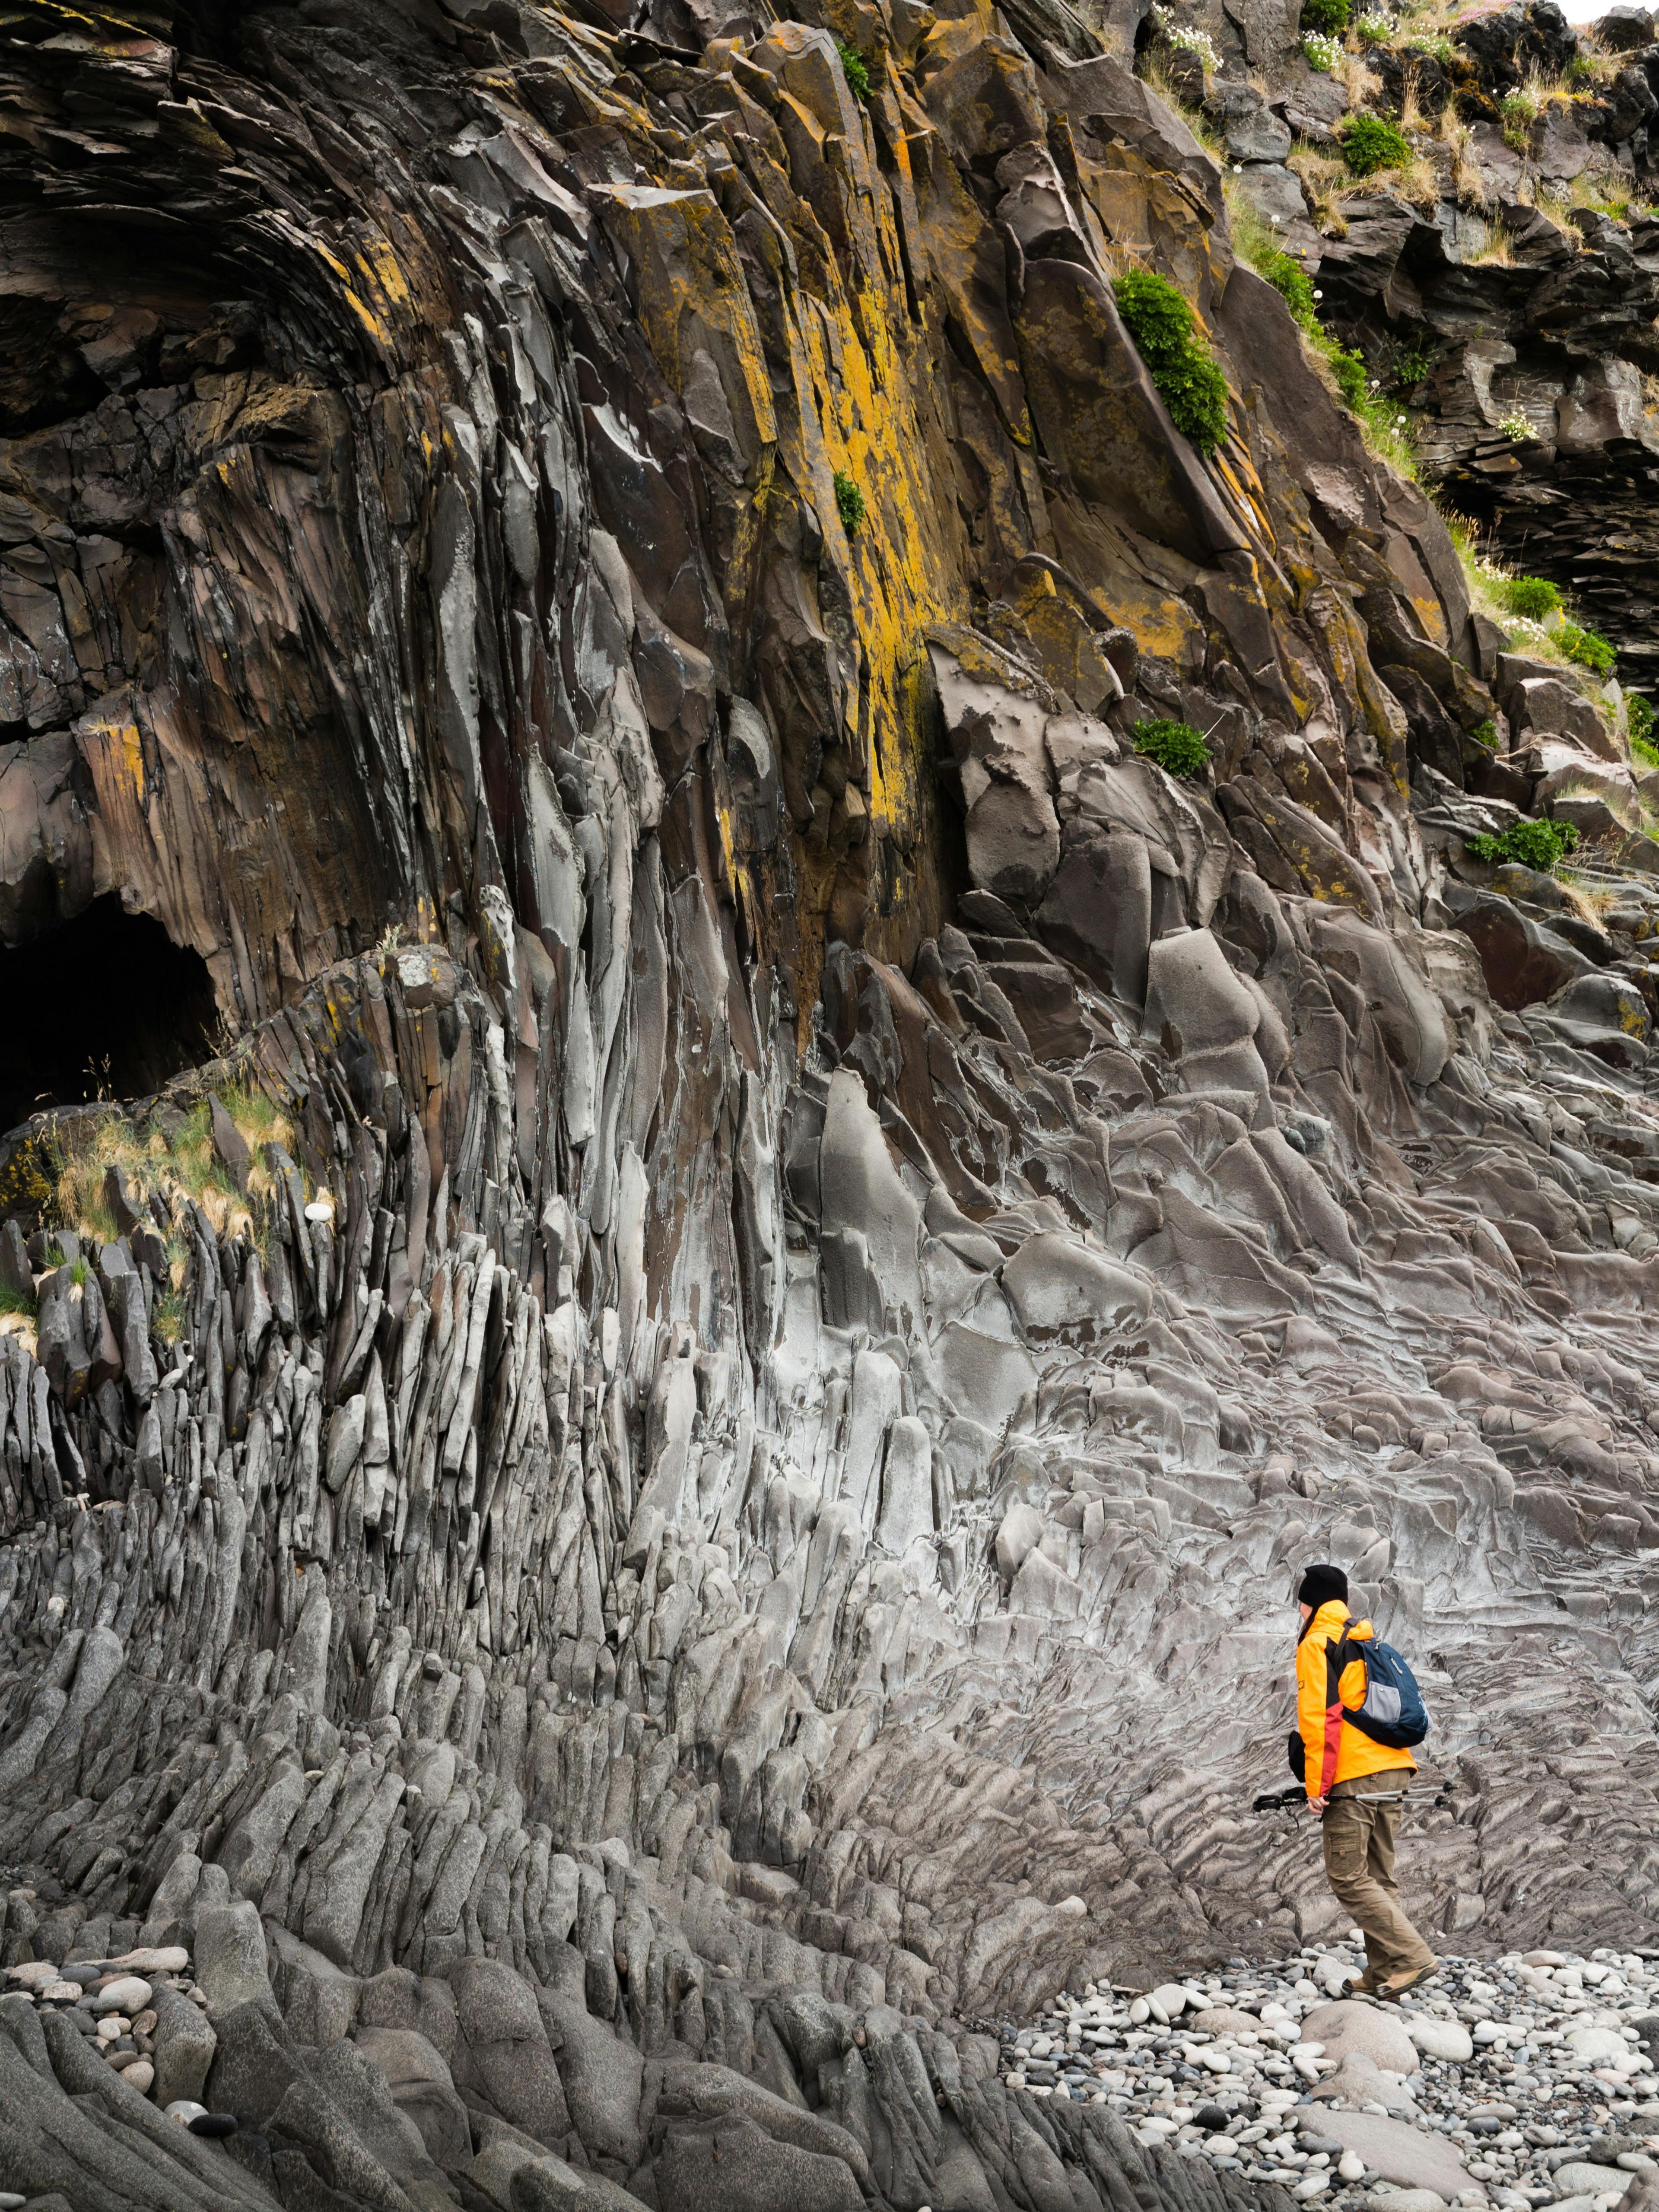 A person in a bright orange jacket explores a striking geological formation with sharp, jagged rocks and layers of smooth, wave-like stone patterns, set against a backdrop of lush greenery and moss.